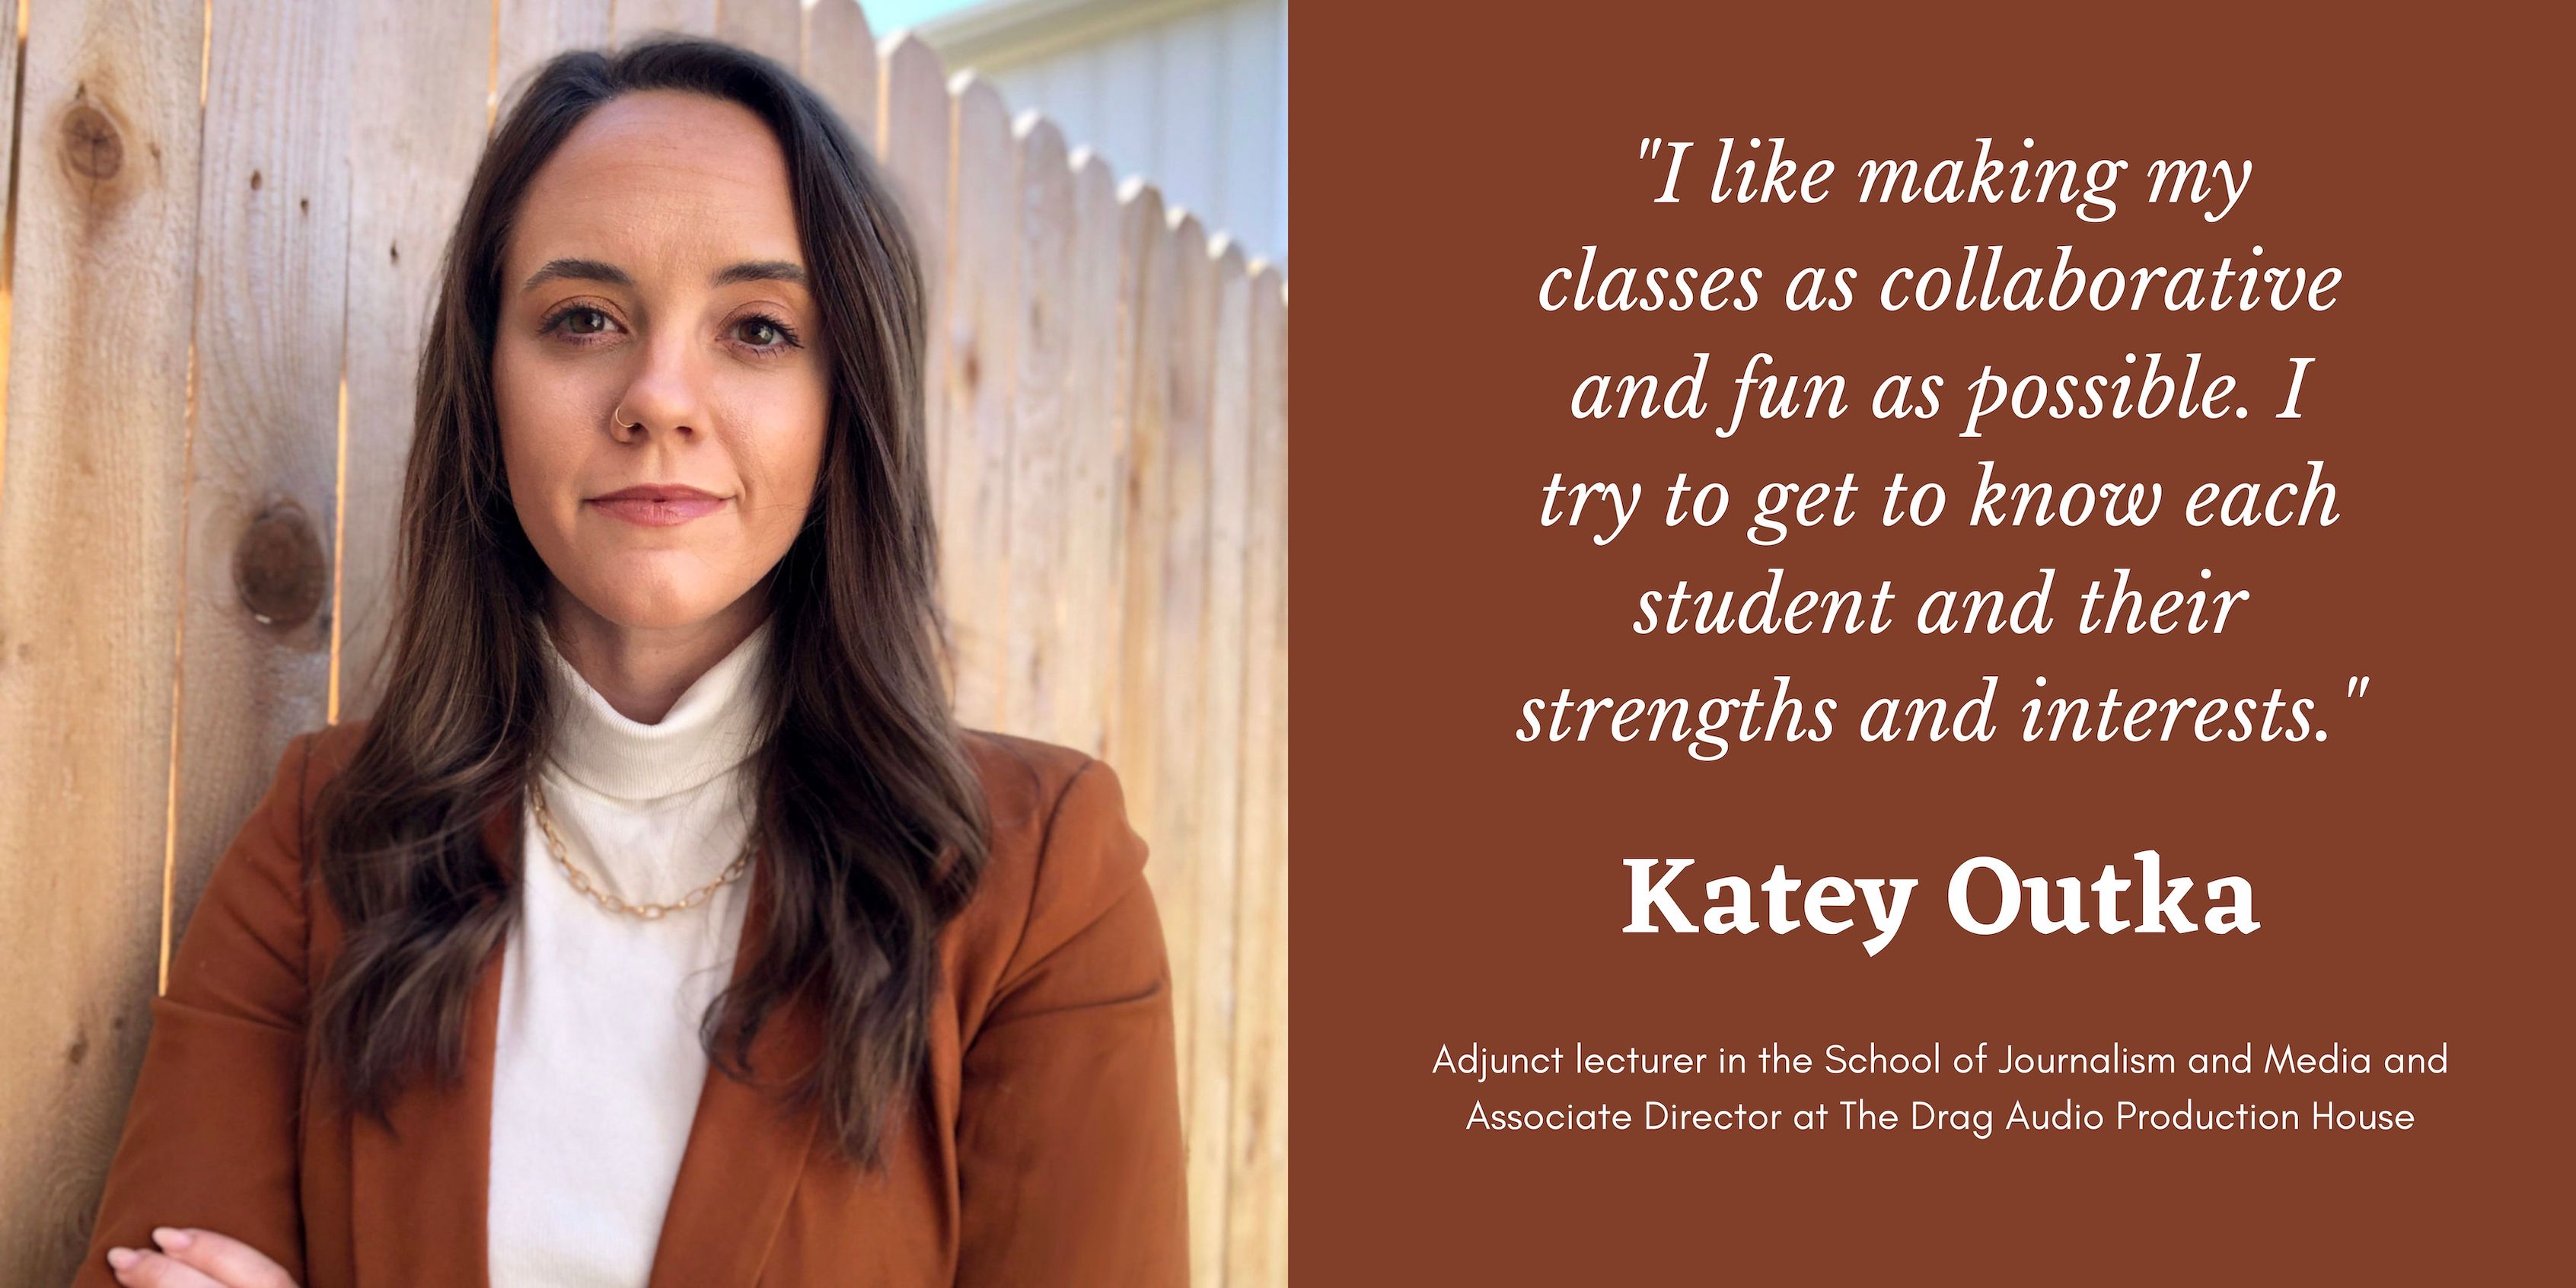 On the left is a photo of Professor Katey Outka. On the right is a quote in white text that says, "I like making my classes as collaborative and fun as possible. I try to get to know each student and their strengths and interests." Below is her name and position title.